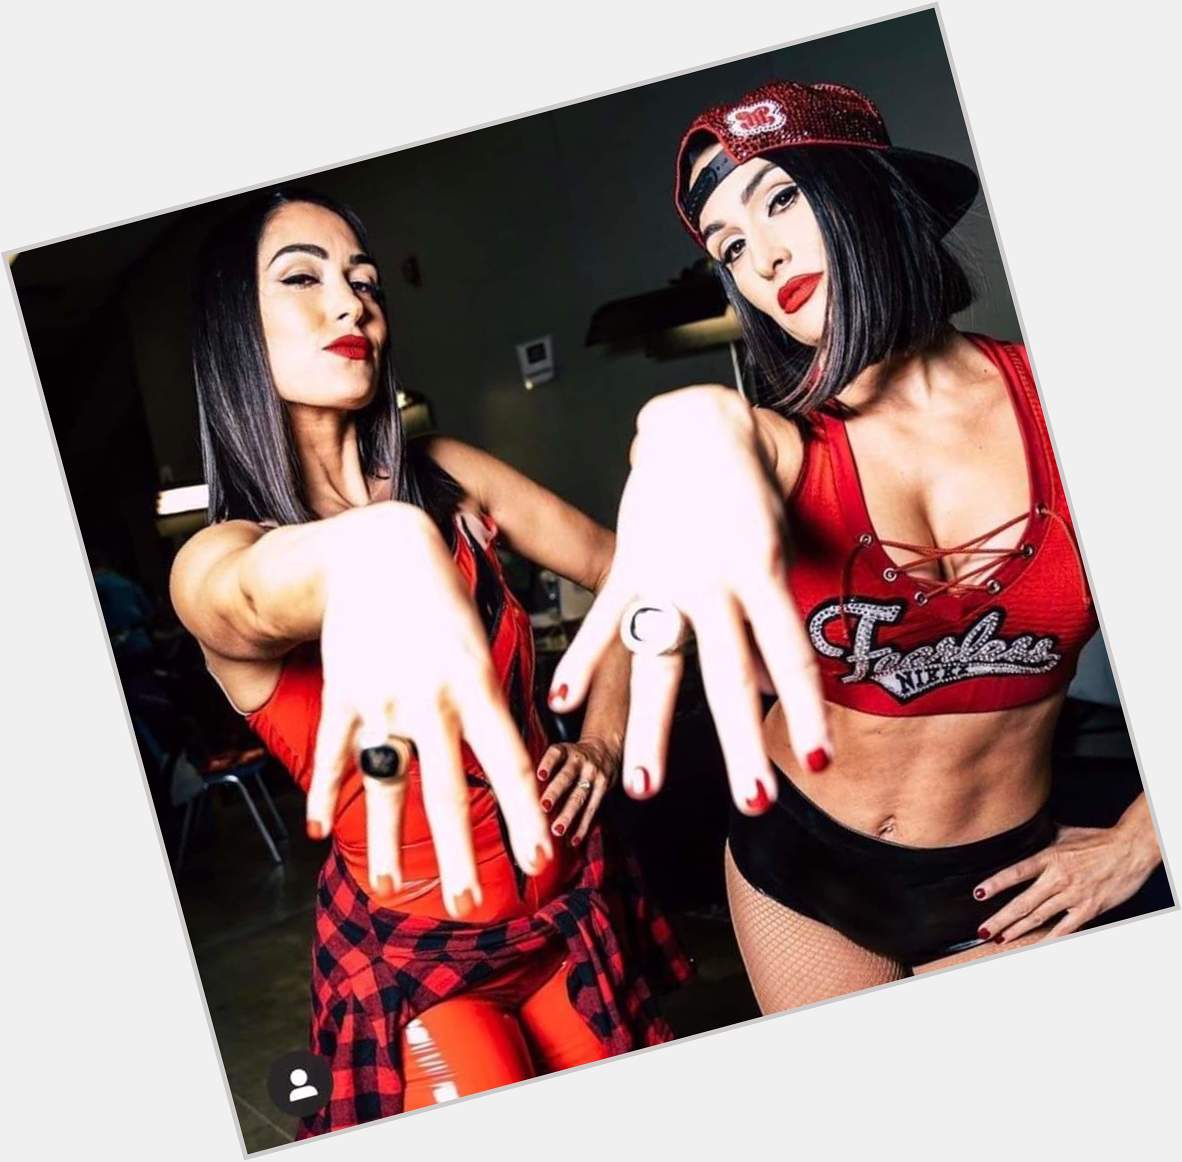 Happy Birthday to The WWE Superstar\s
The WWE Hall Of Famer\s The Bella Twins     